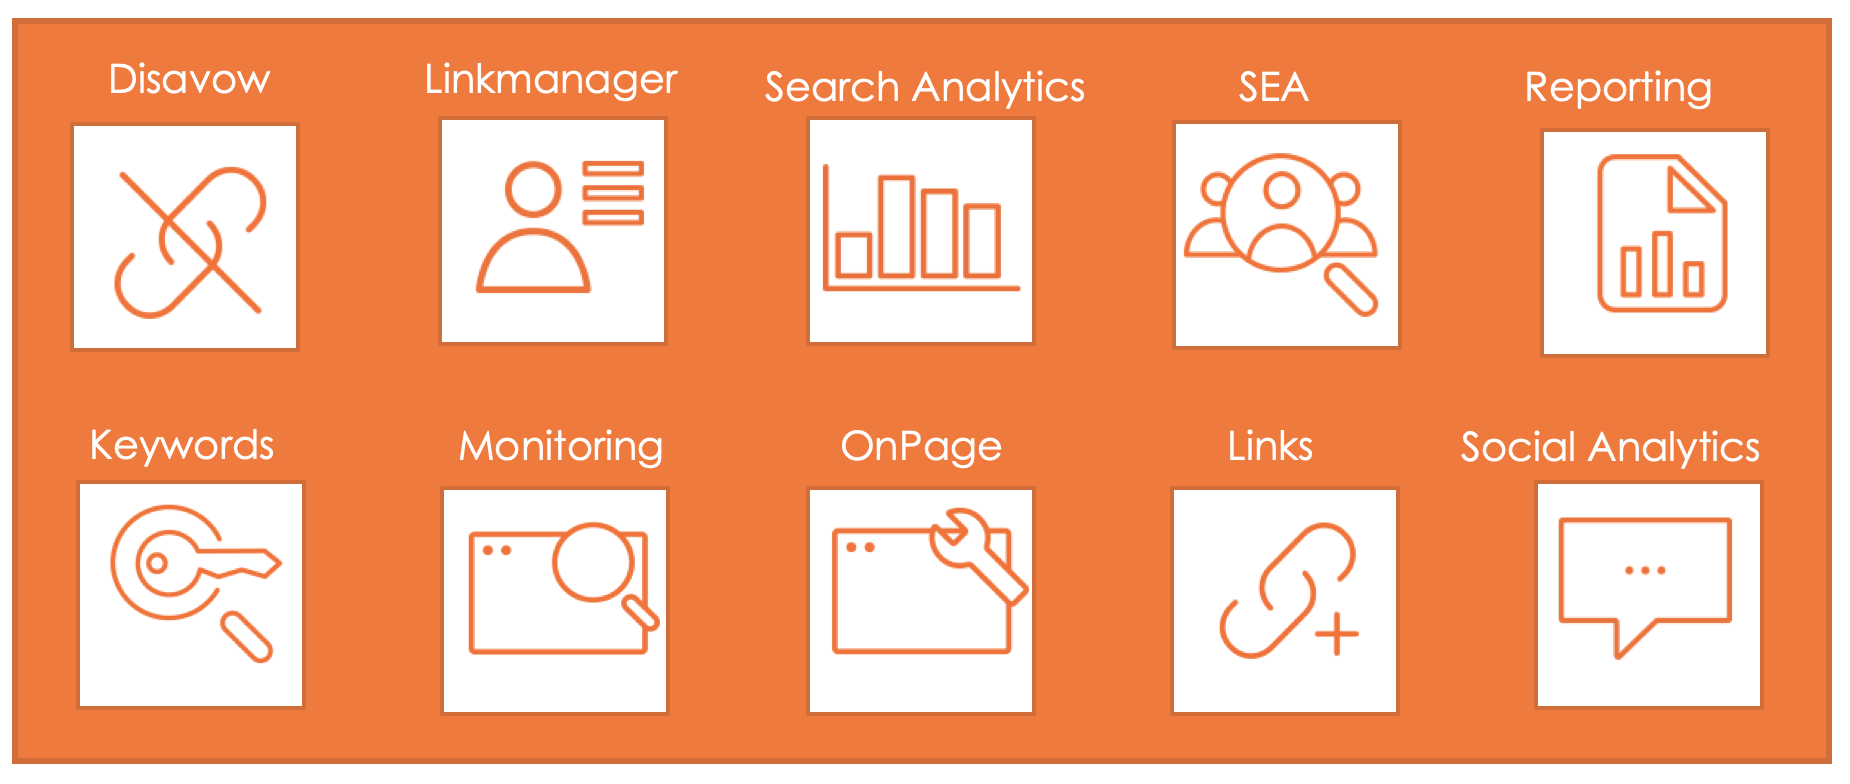 The image provides insights into the various functions of the link building tool Xovi. These include:
- Disavow
- Link Manager
- Search Analytics
- SEA
-Reporting
- keywords
- monitoring
- OnPage
- links
- Social Analytics

© Xovi